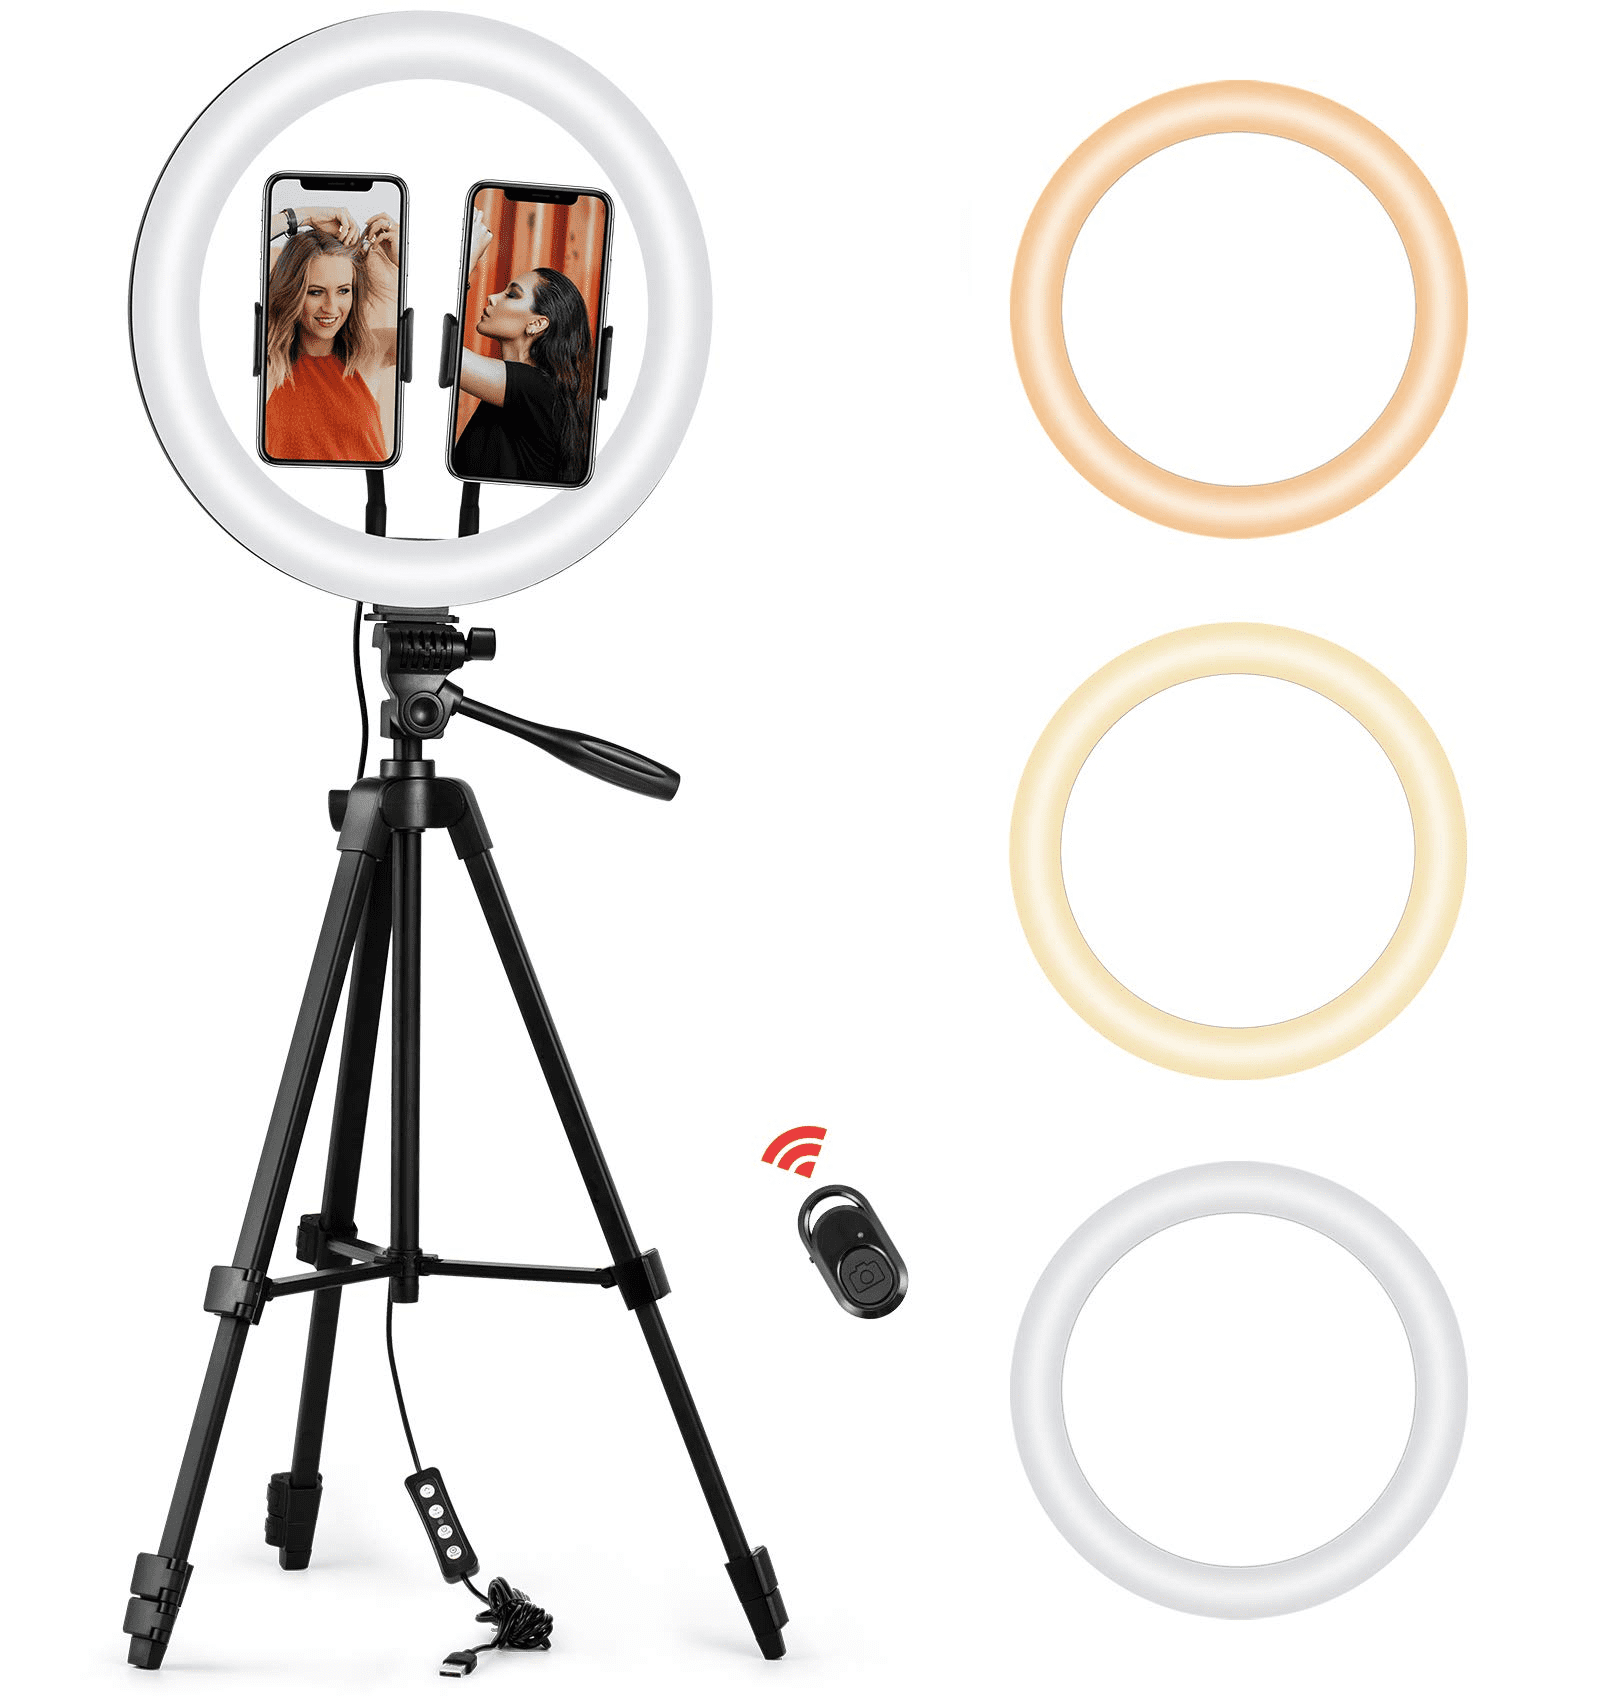 Tlwangl Ring Light Ring Lamp Video Light Inch 12cm Dimmable LED Selfie Ring Light USB Photography Light with Tripod for Phone Makeup Color : Round Bracket Set